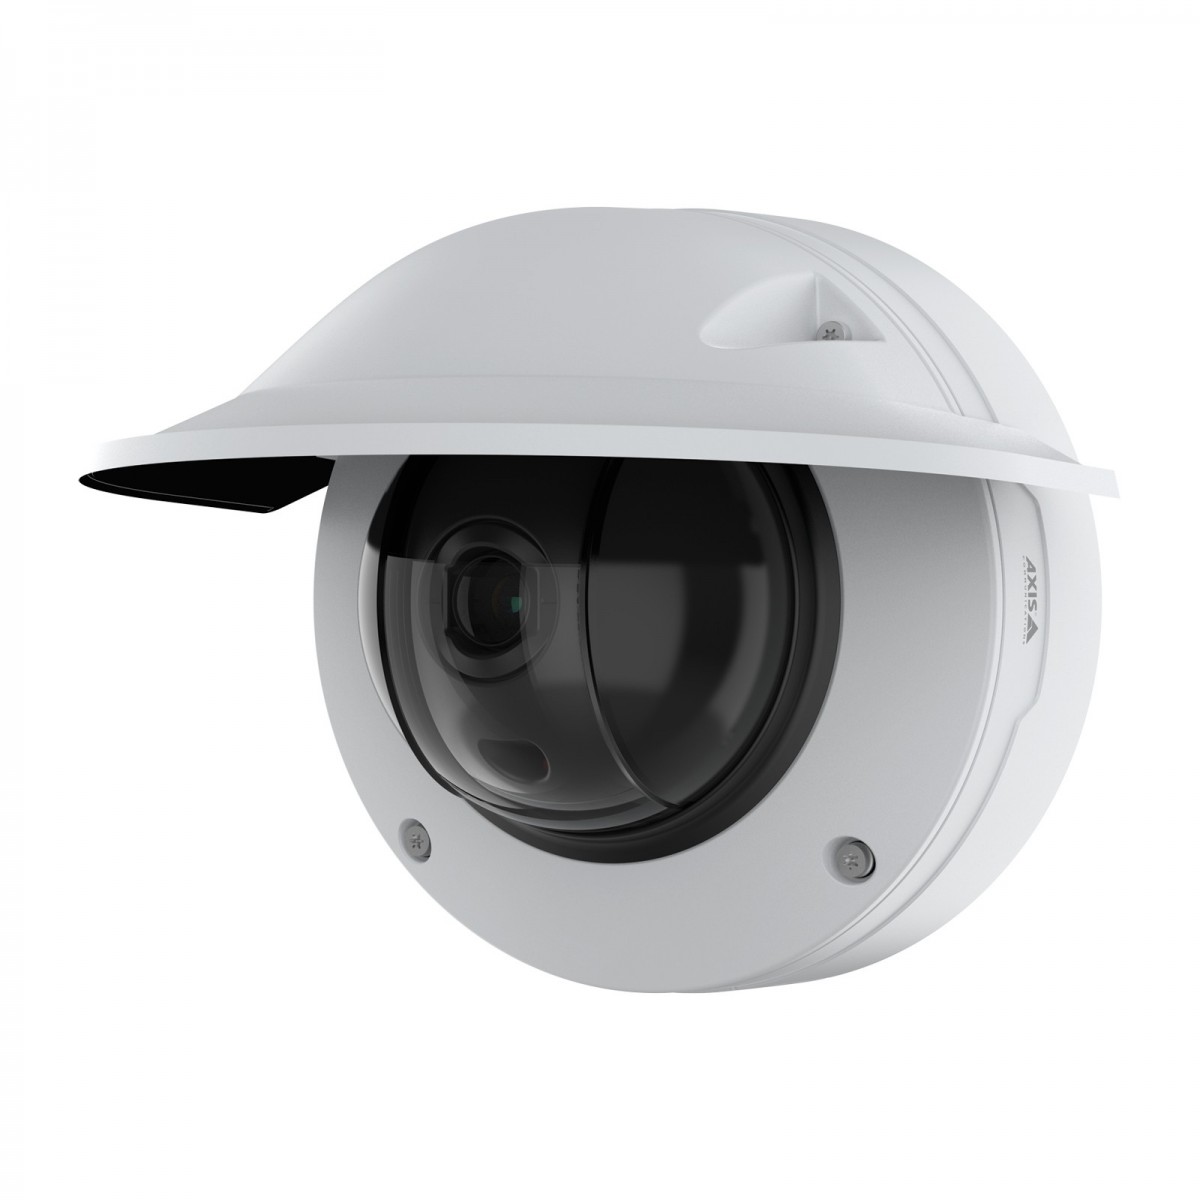 Axis Q3536-LVE 29MM DOME CAMERA